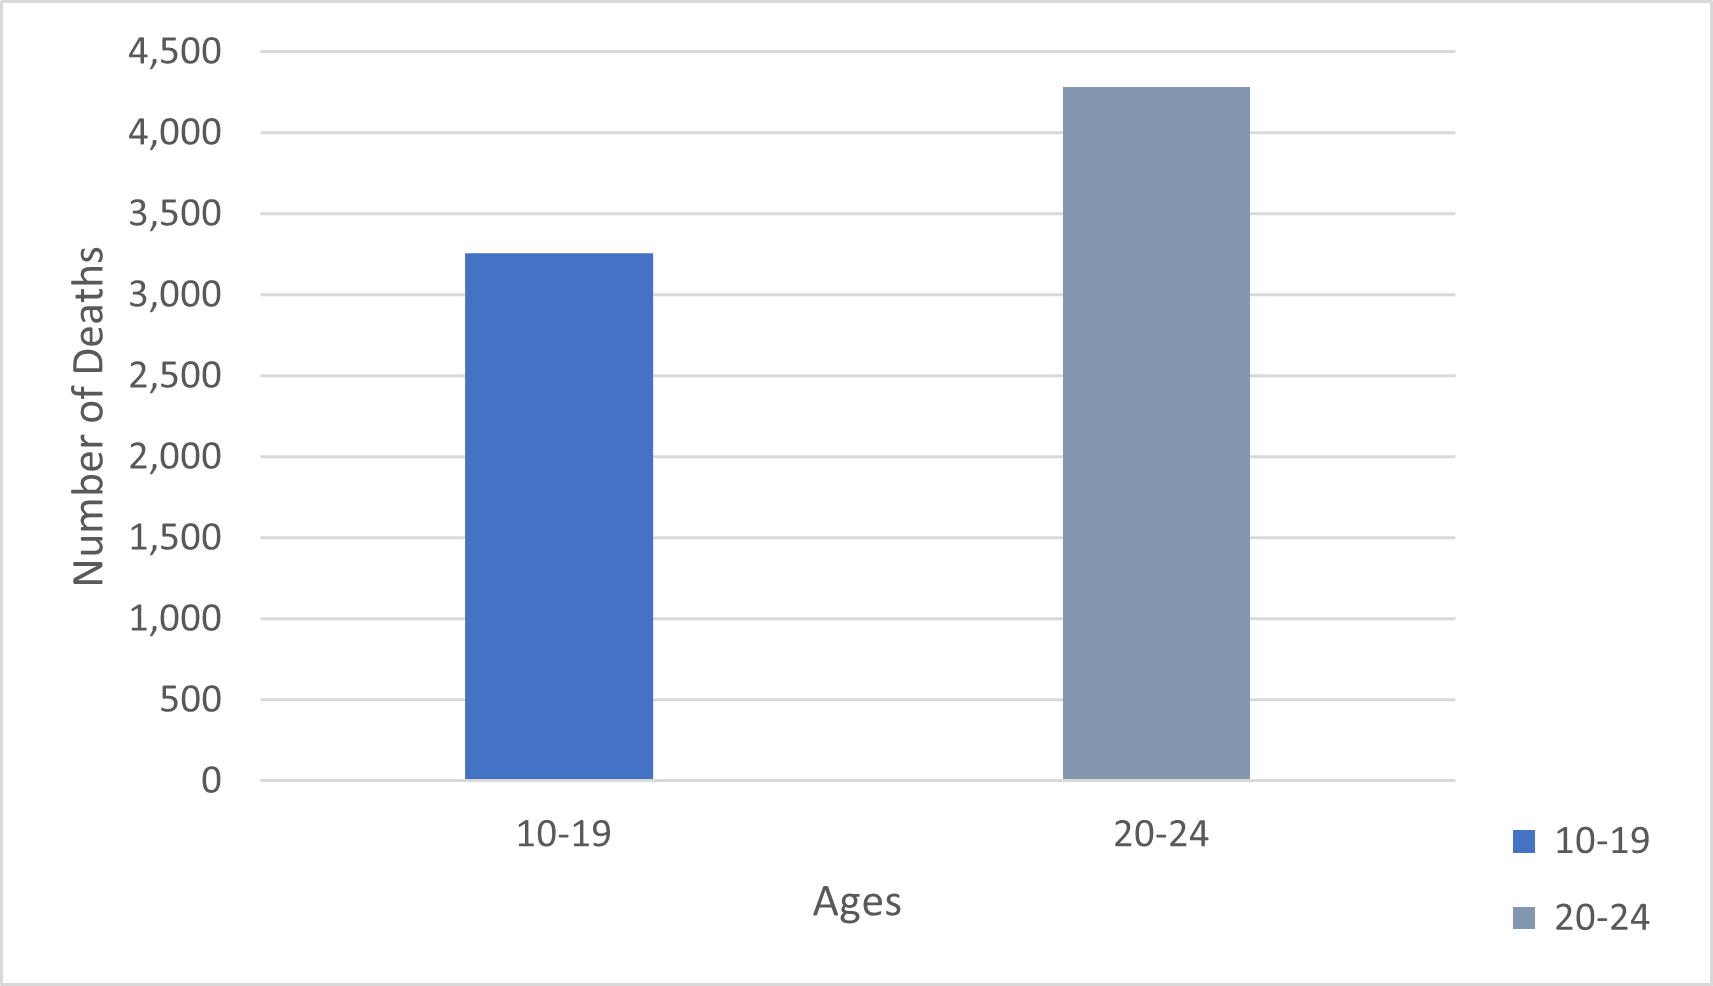 Bar graph showing ages 10-19 and 20-24 and their corresponding number of deaths, those of which are high. 